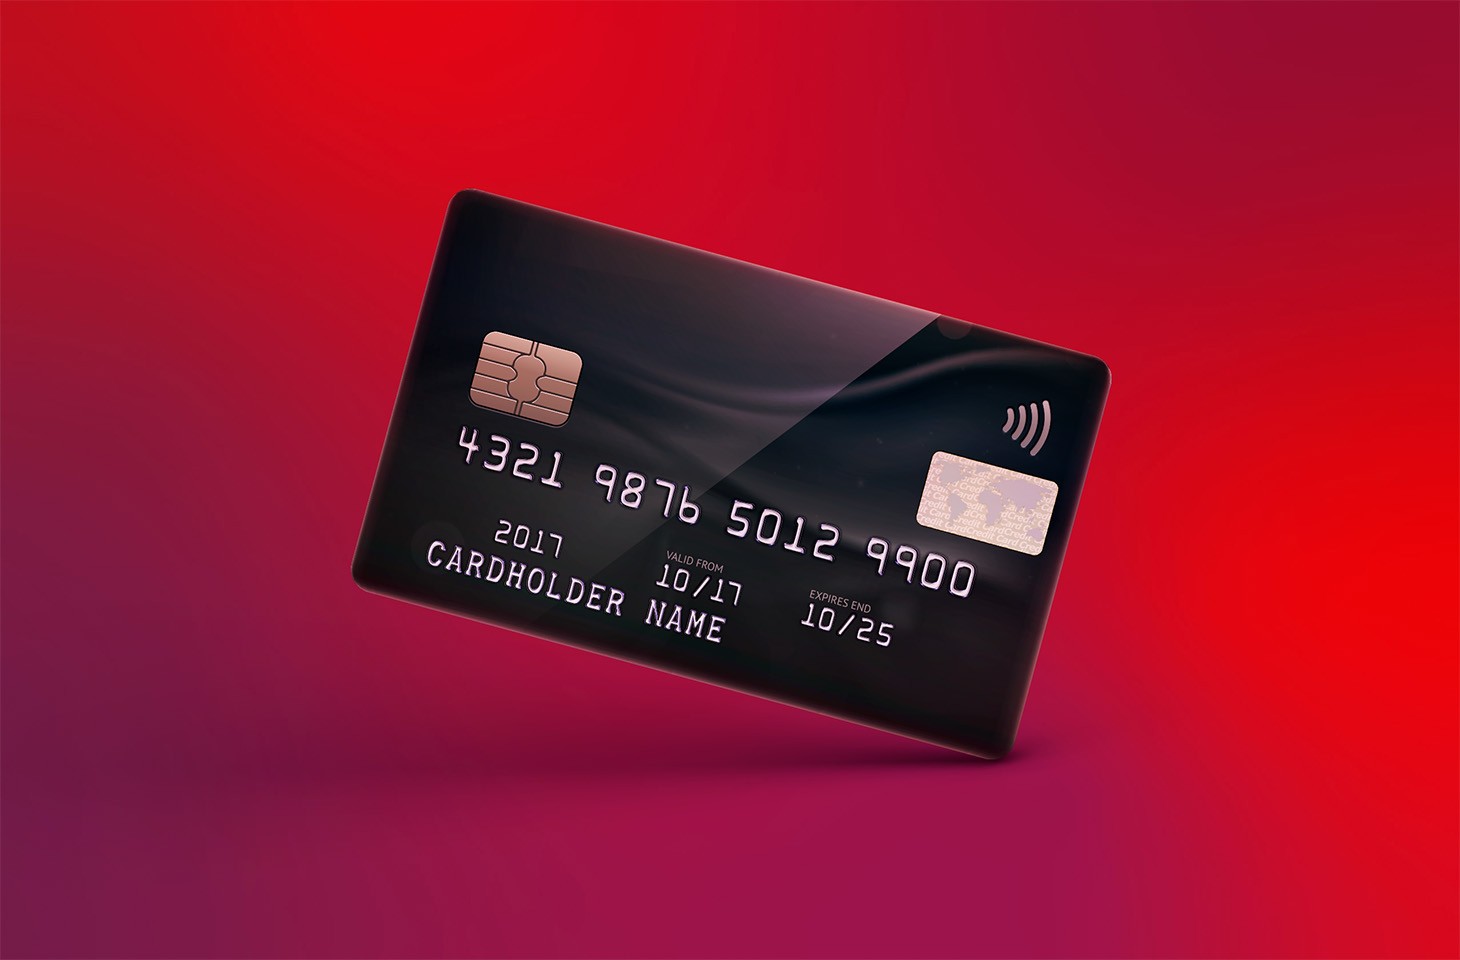 How to protect funds being stolen from bank cards with a chip and NFC